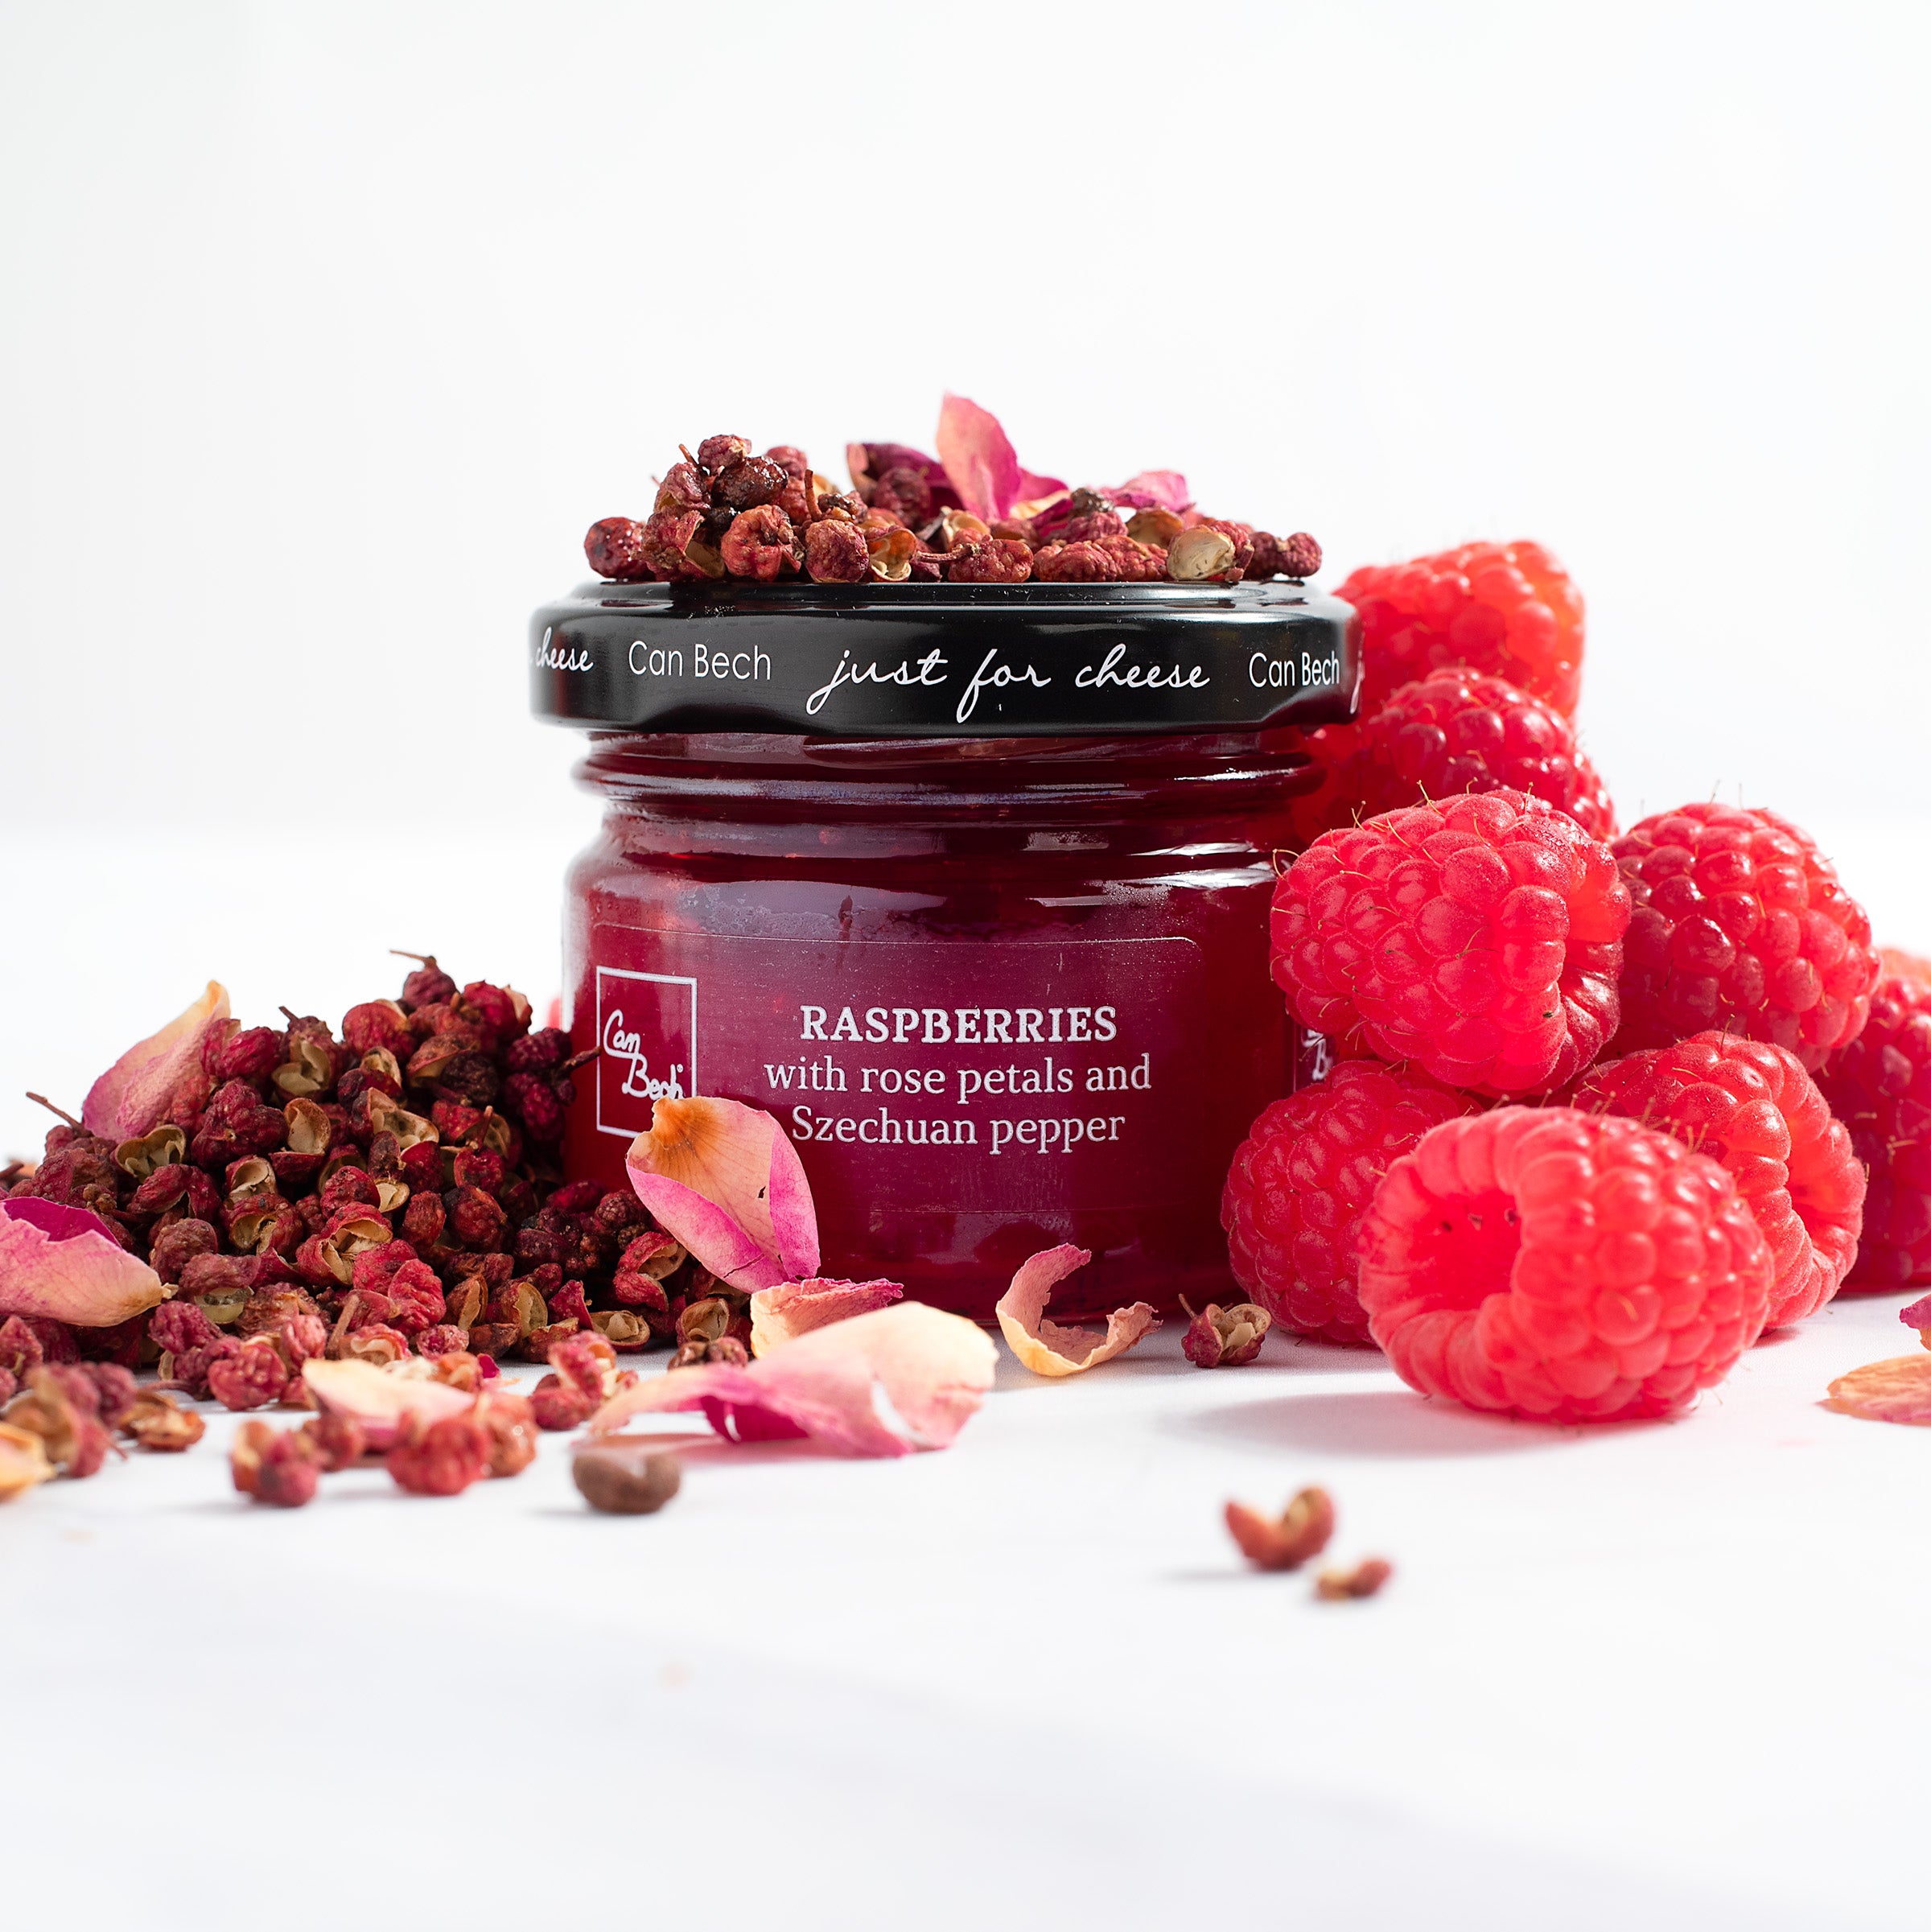 Raspberry Spread with Rose Petals and Sichuan Pepper